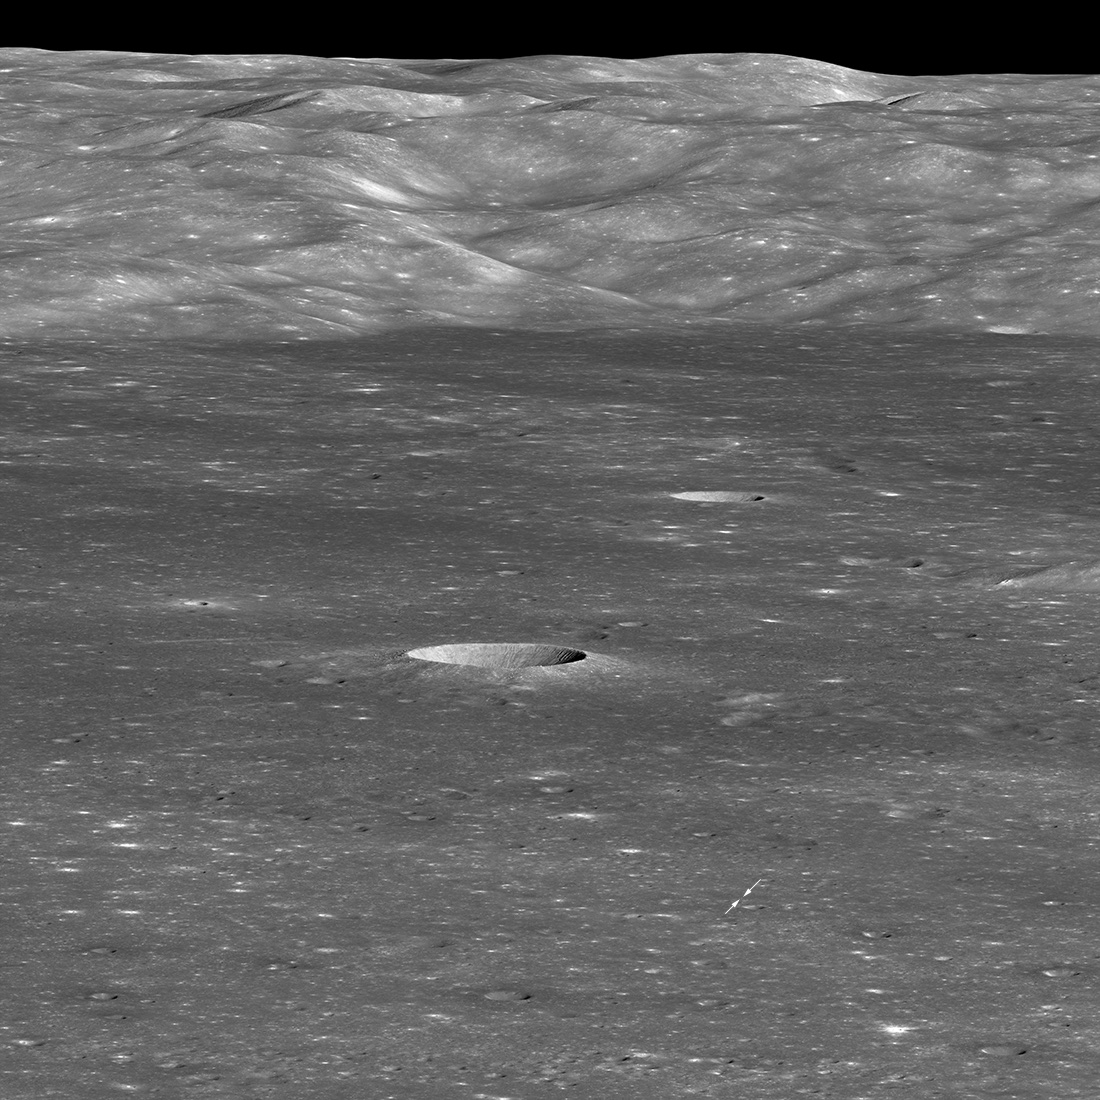 oblique view of large crater with arrows marking spot of landing